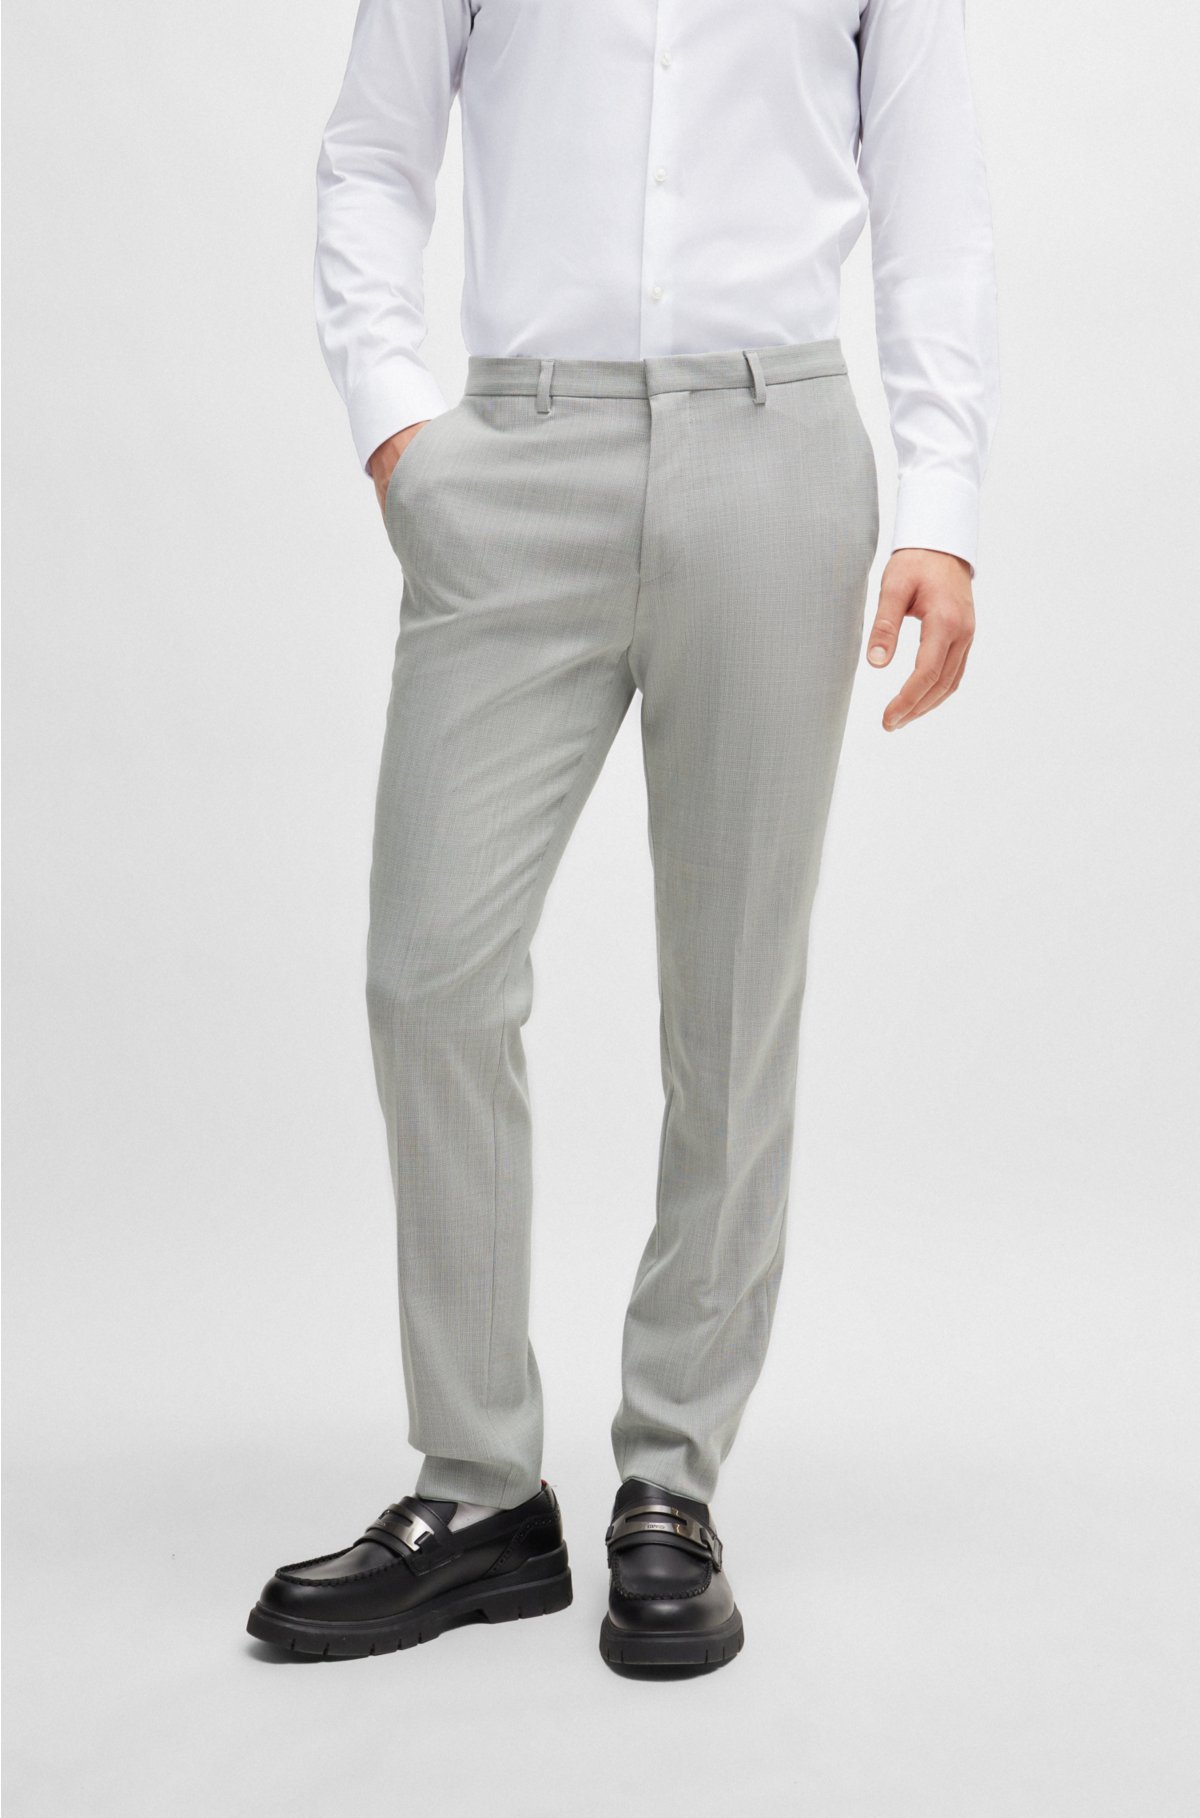 Extra-slim-fit suit in patterned performance-stretch cloth, Light Grey